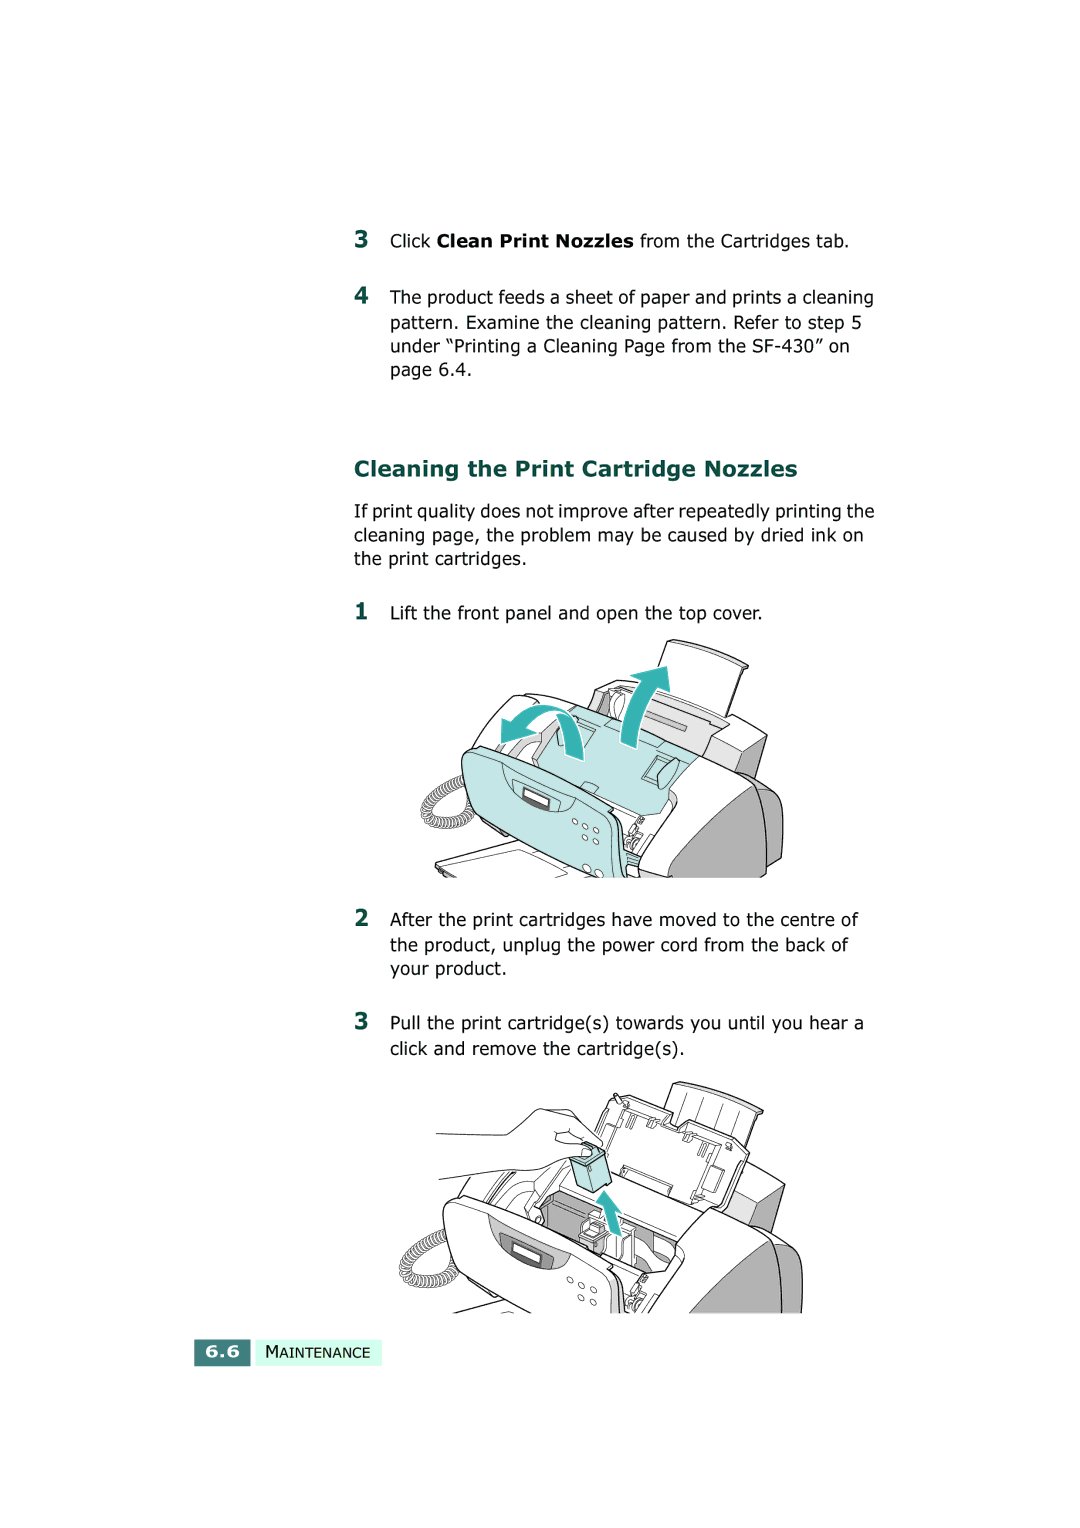 Samsung SF-430 manual Cleaning the Print Cartridge Nozzles 